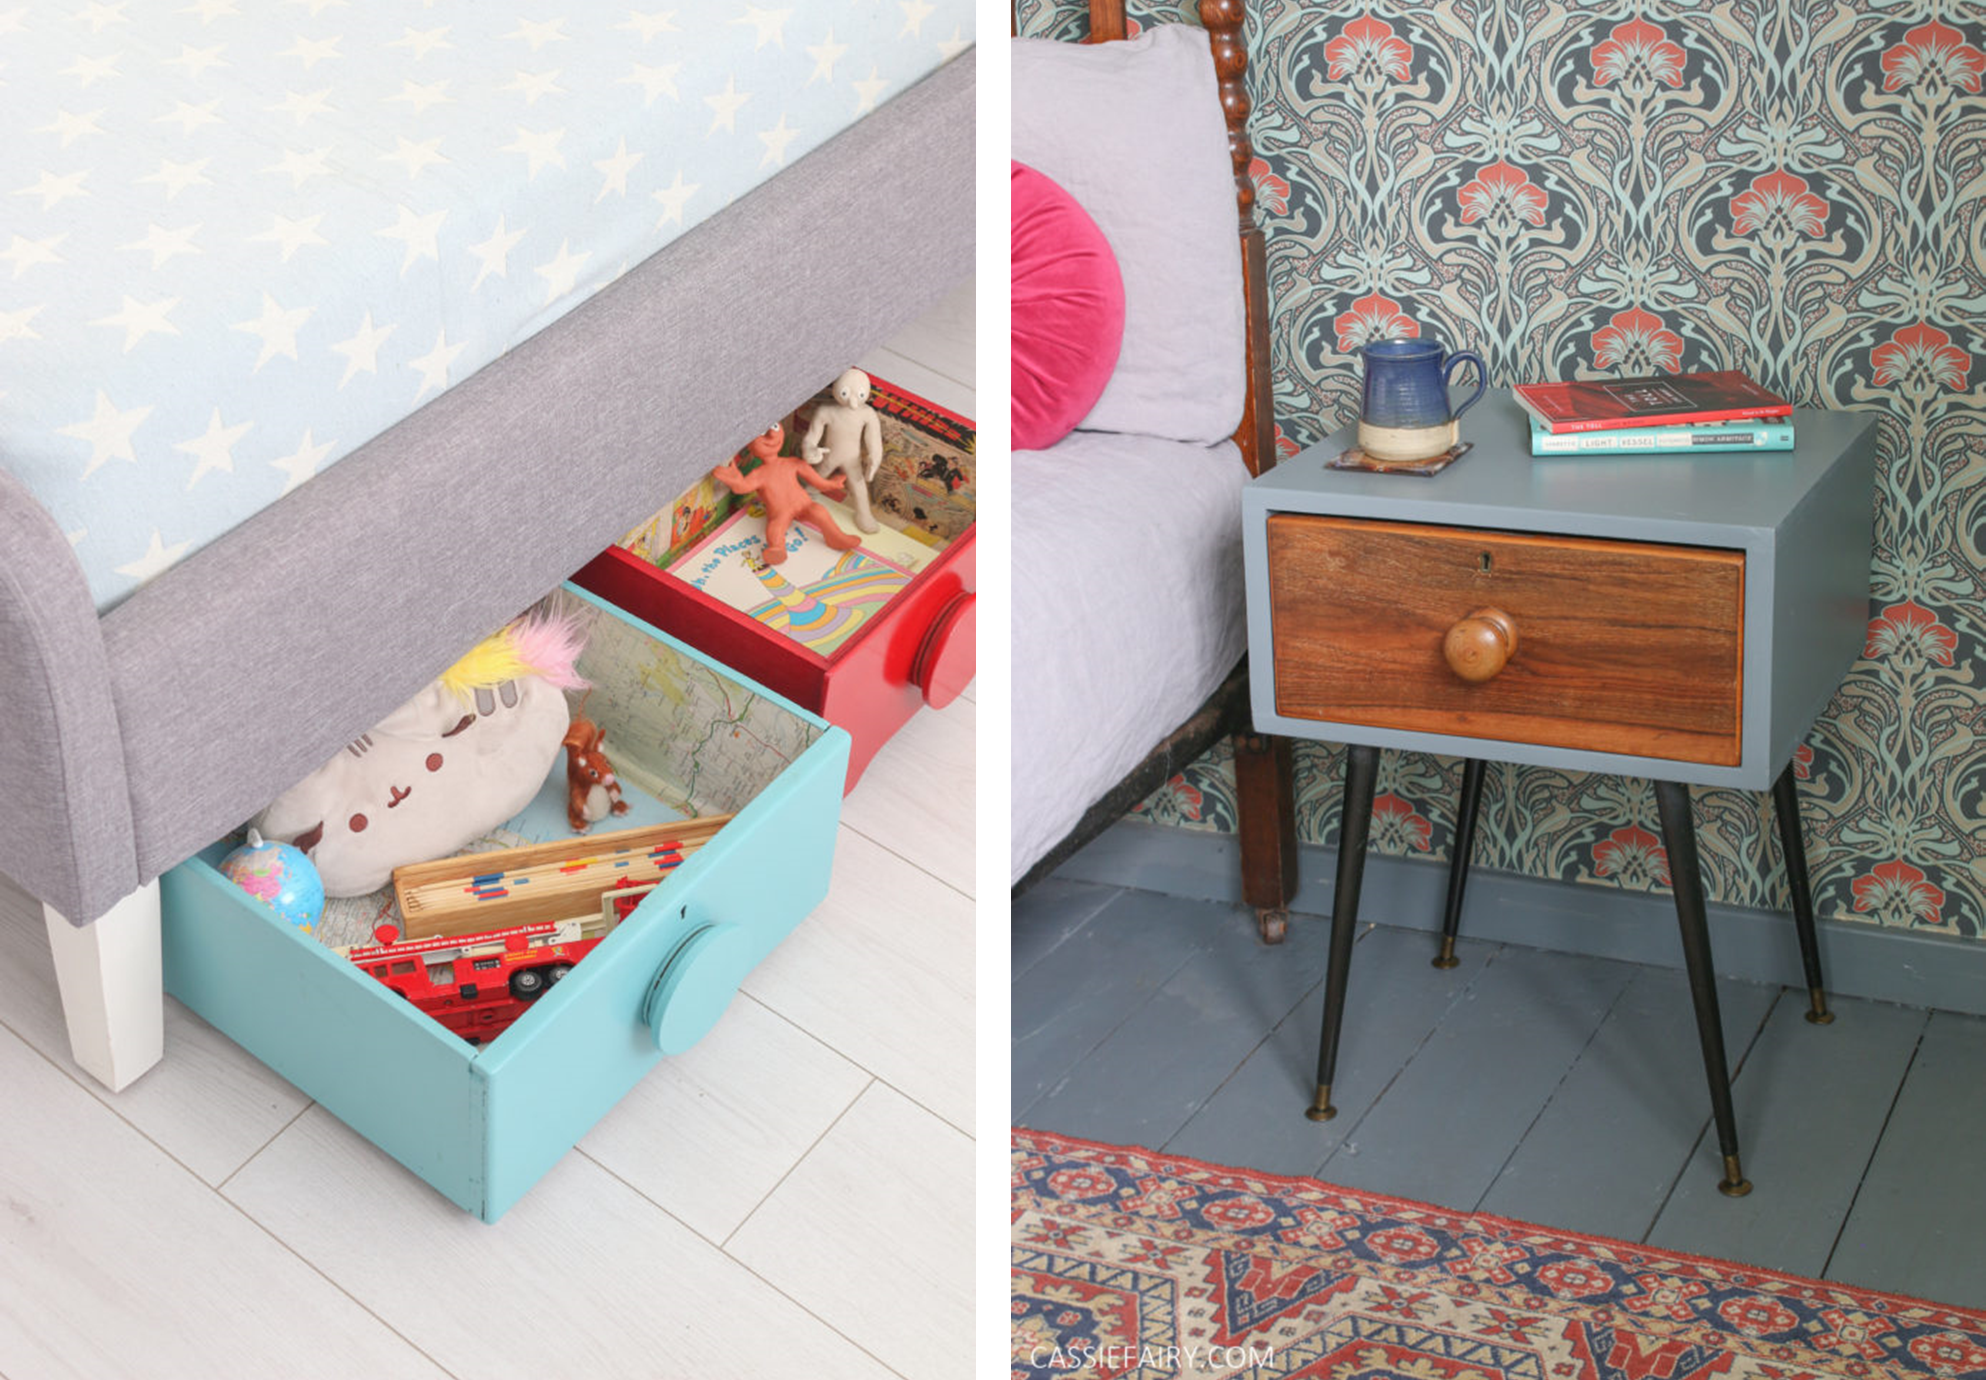 How To Make Upcycled Drawers into a Handy Wall Unit - Pillar Box Blue